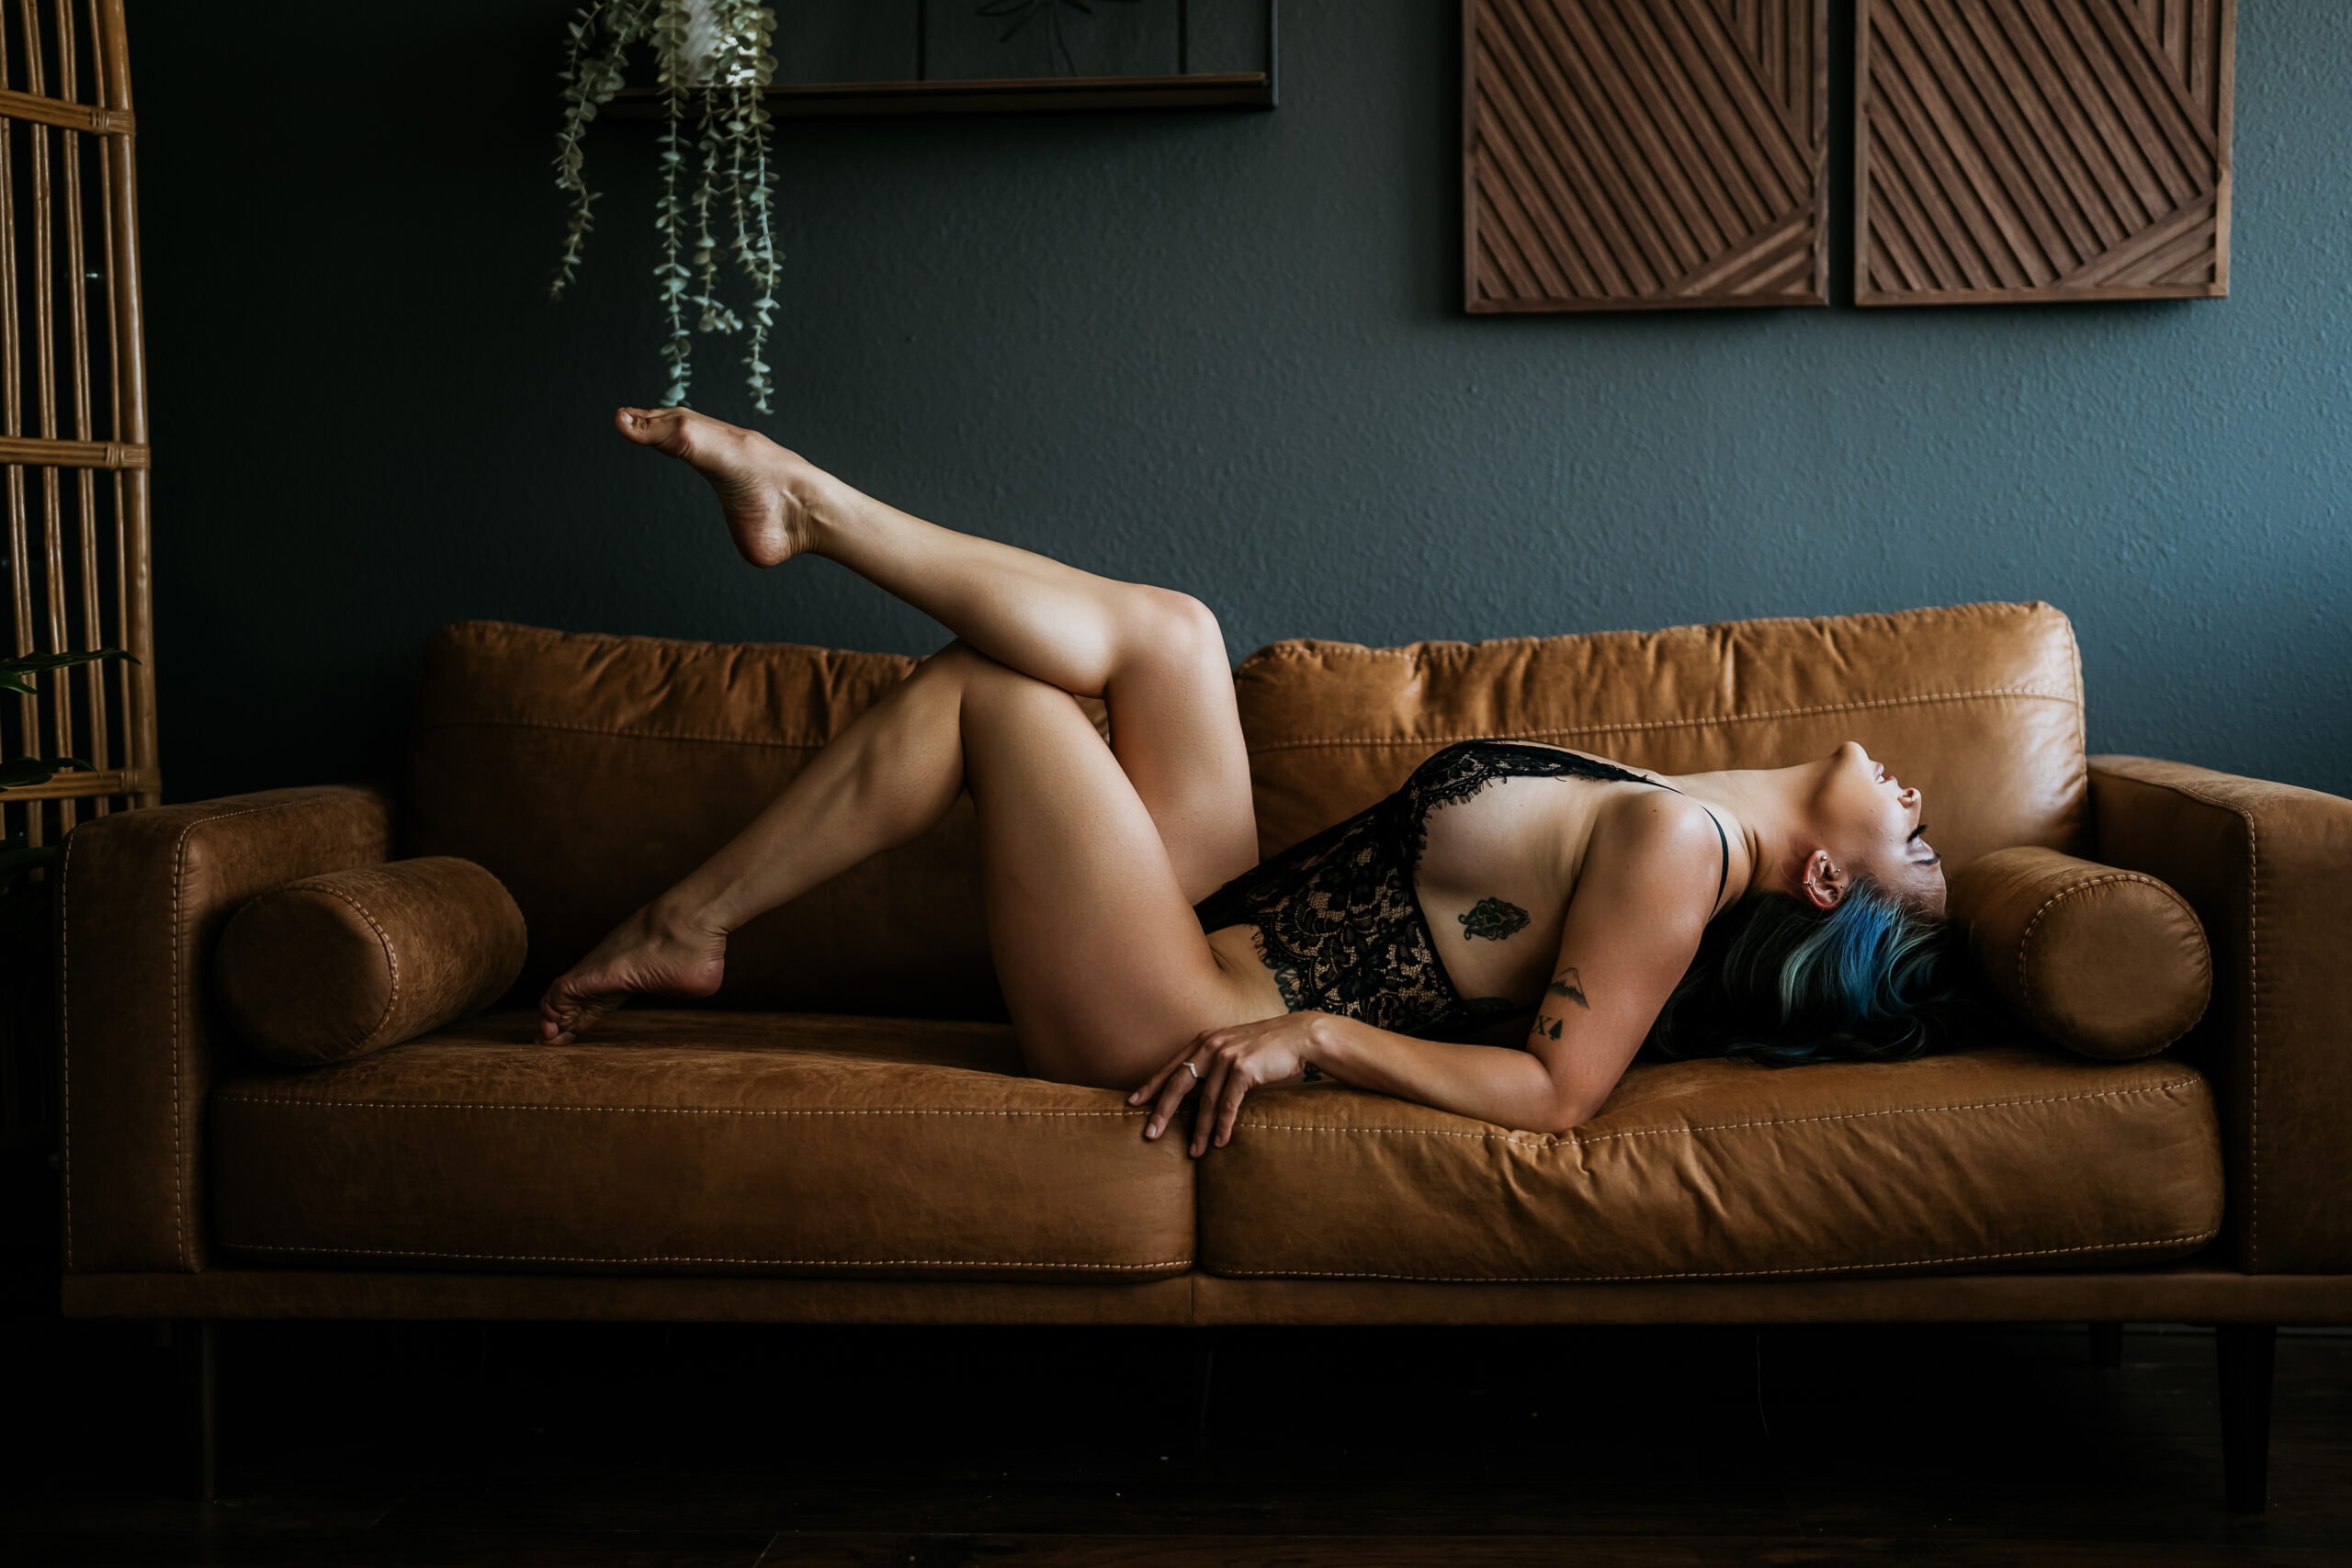 Lesbian woman lying on back on couch with leg and foot extended. Photo by Katie O'Docharty, Denver Boudoir Photographer